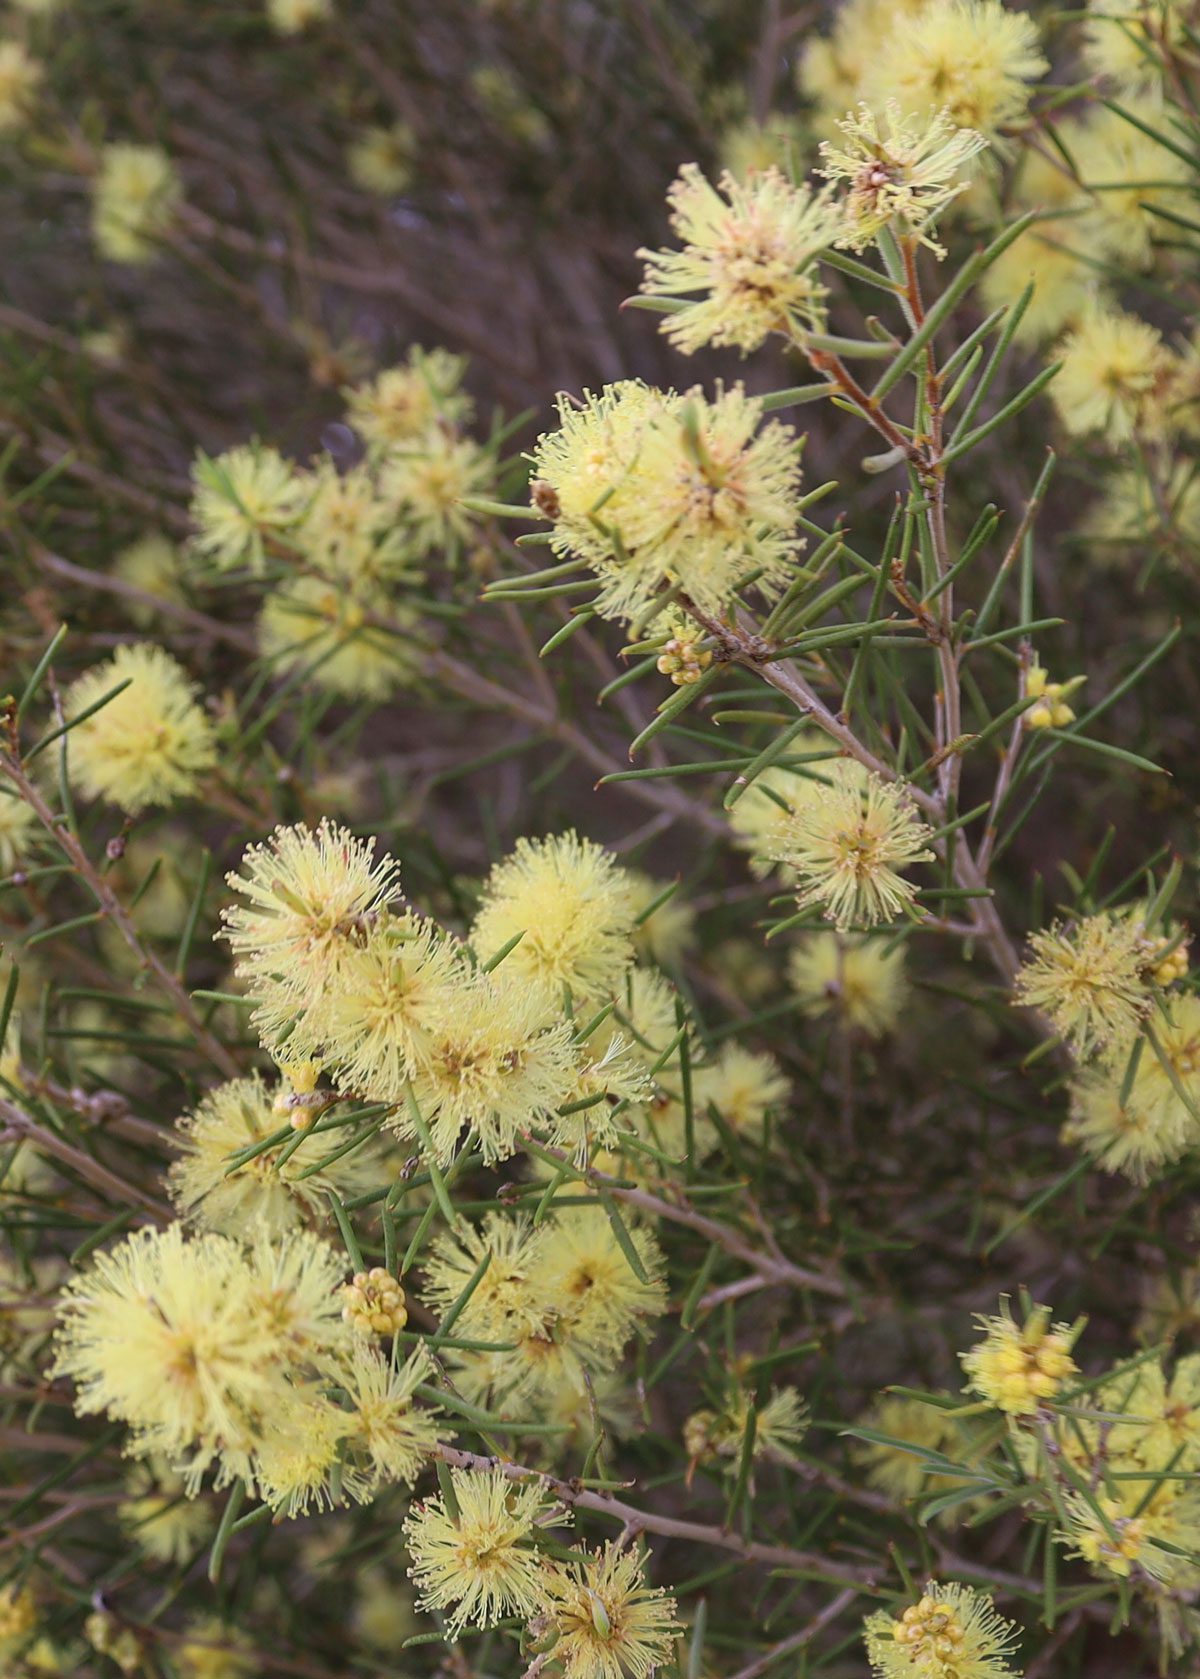 Melaleuca or honey myrtles are small shrubs or trees mostly found in Northern Australia.